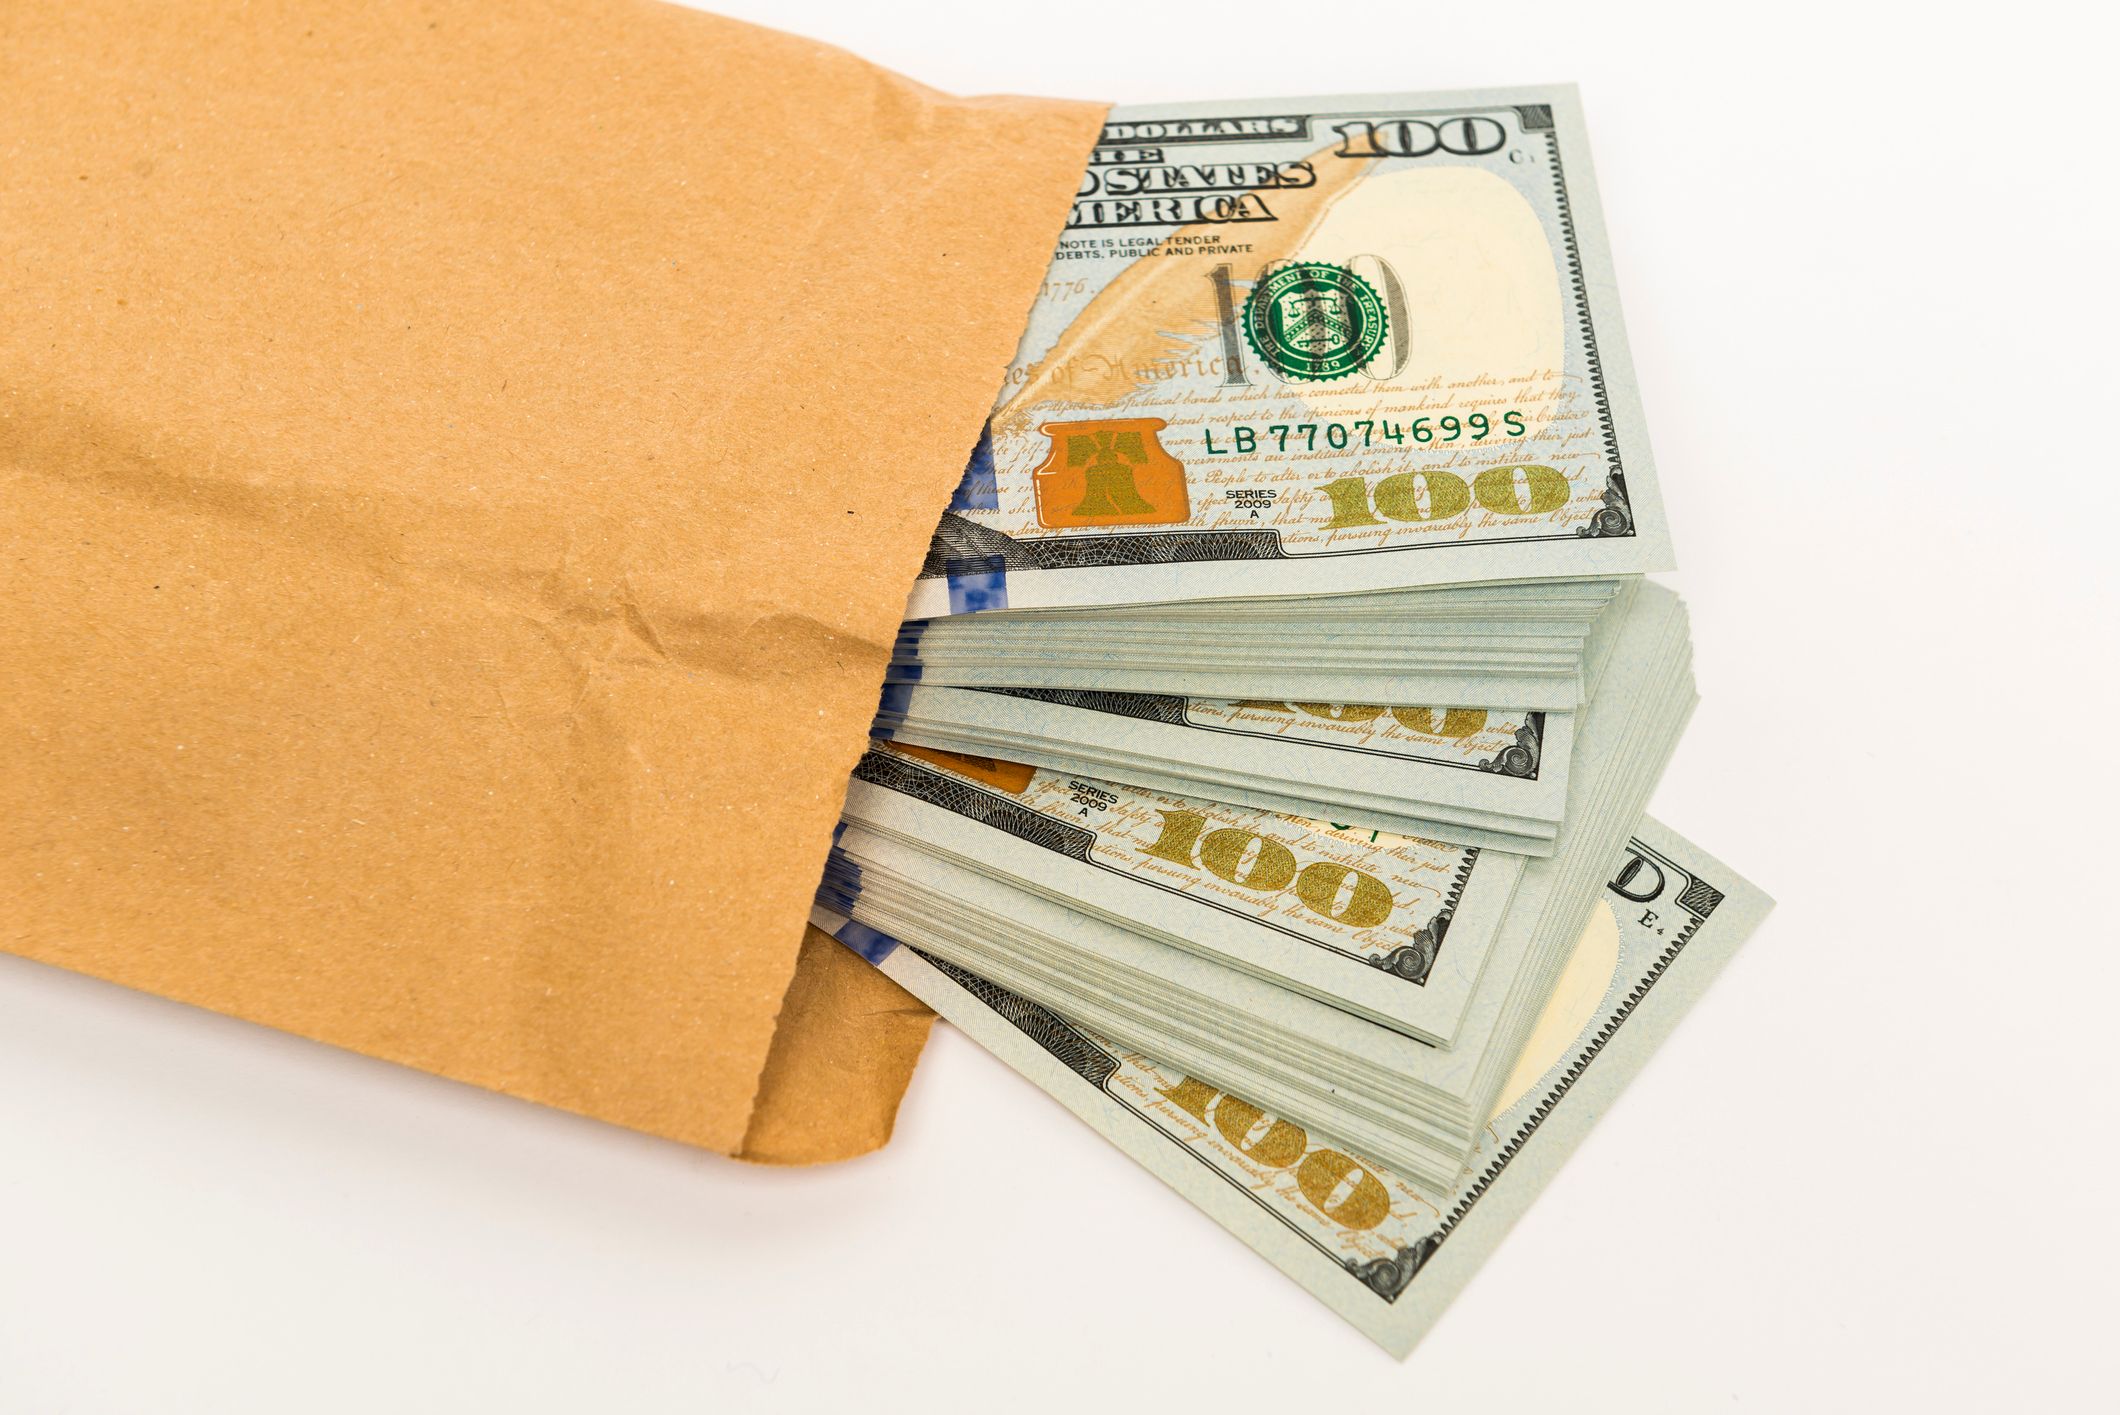 Several dollar bills in an envelope | Source: Getty Images